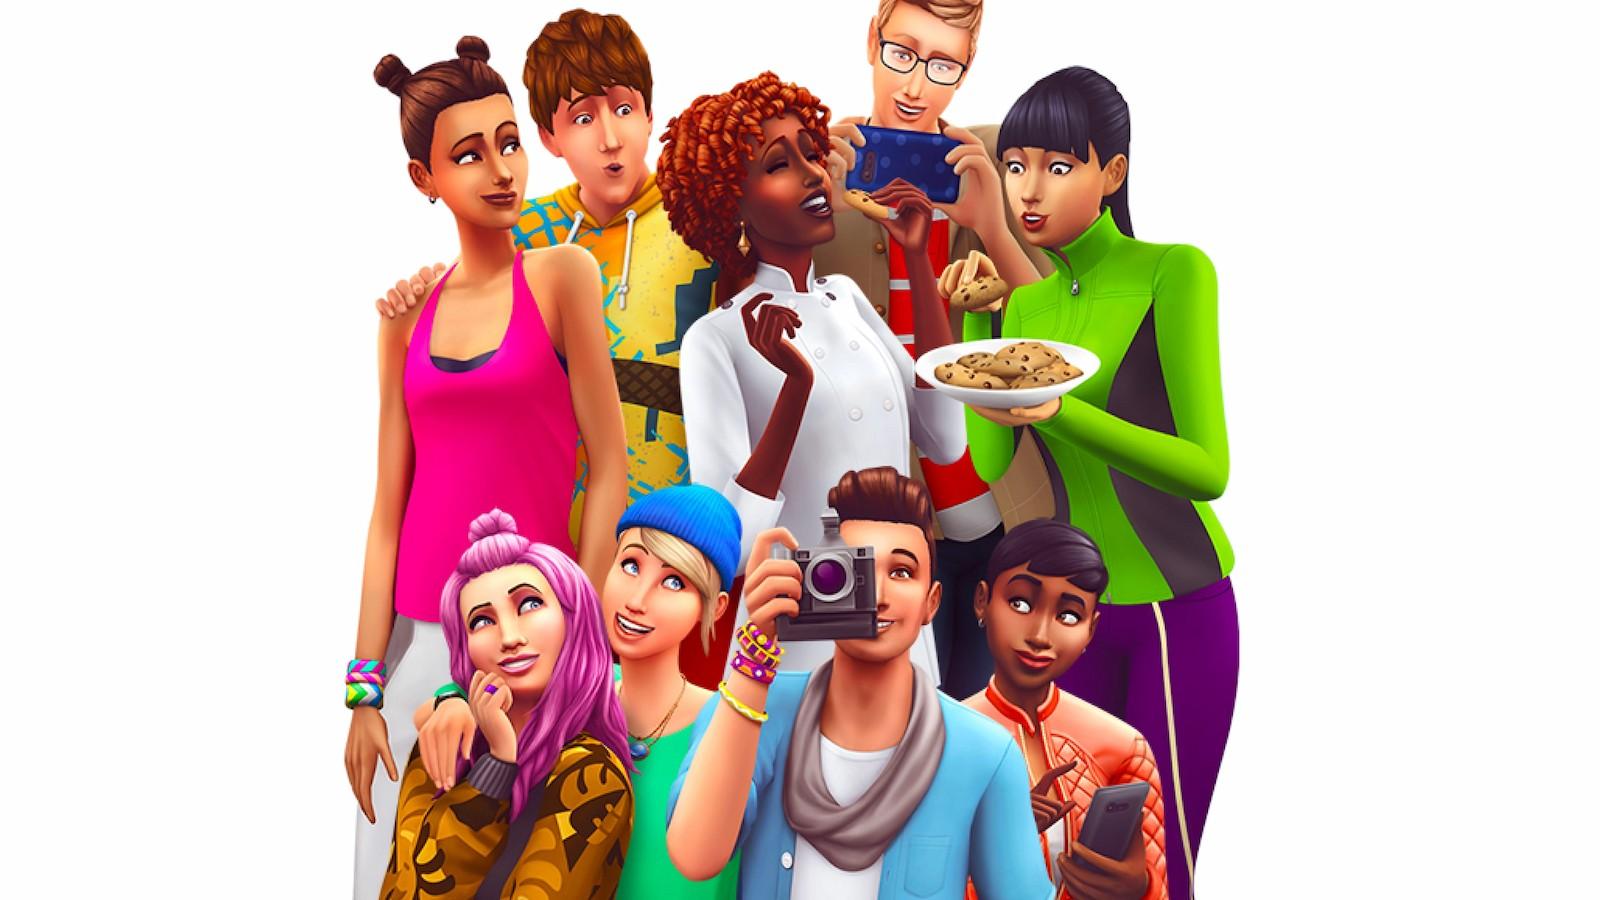 A group of Sims together from The Sims 4